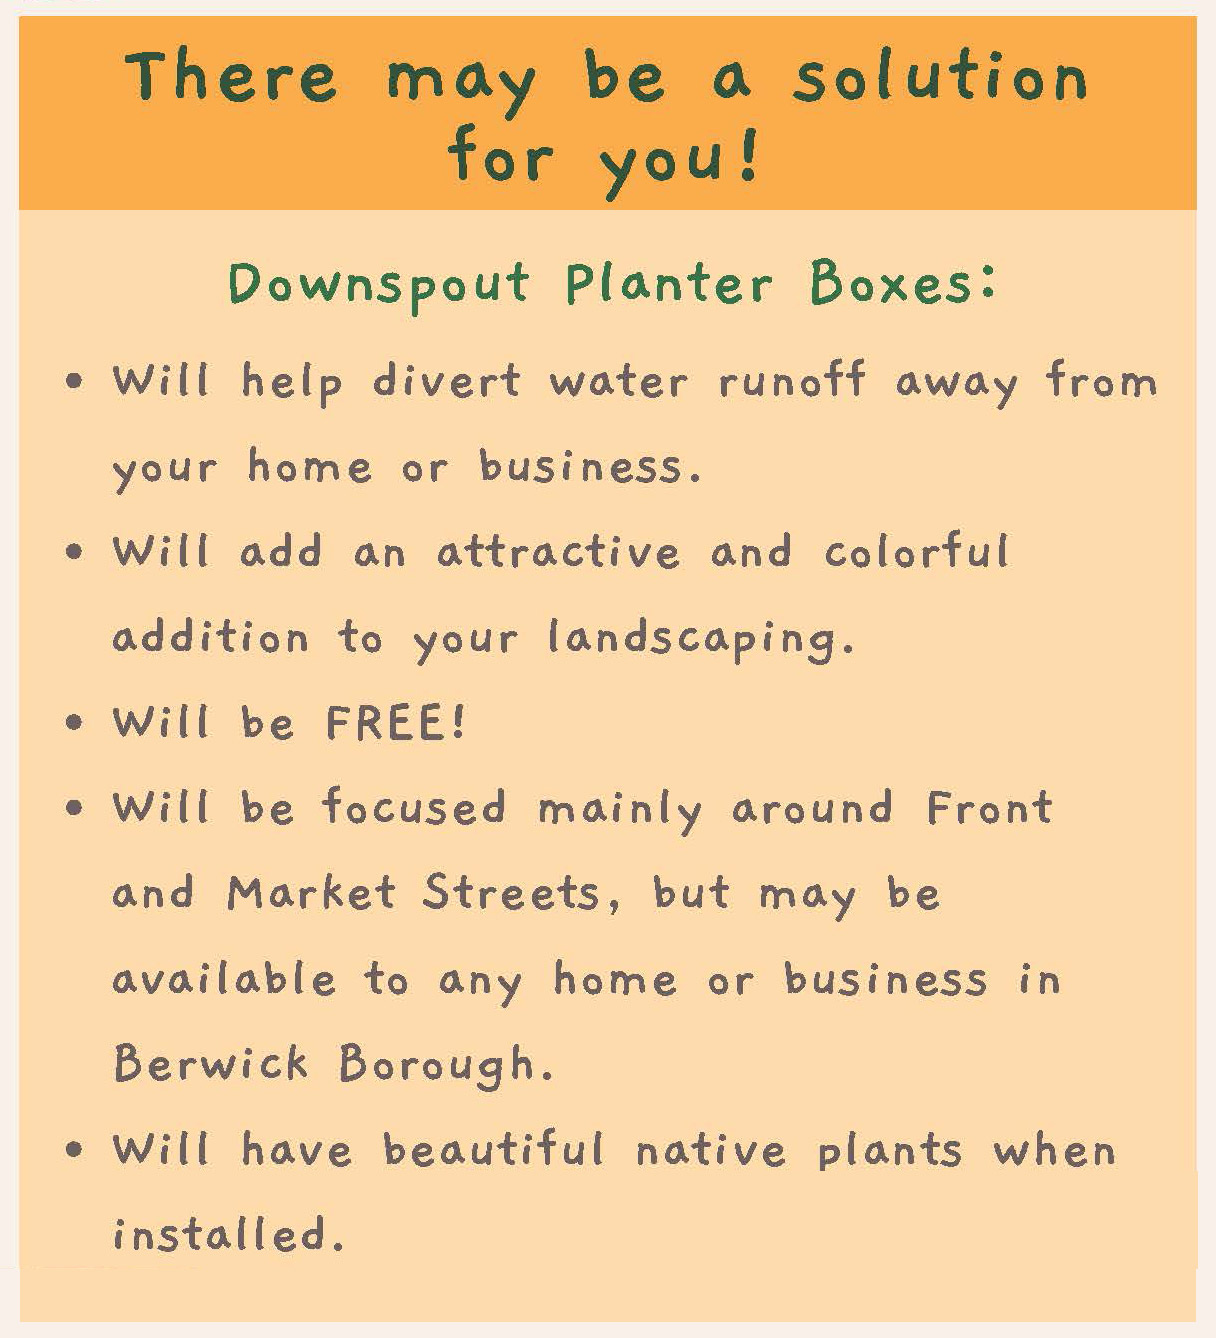 Flower Box Solutions Image 2